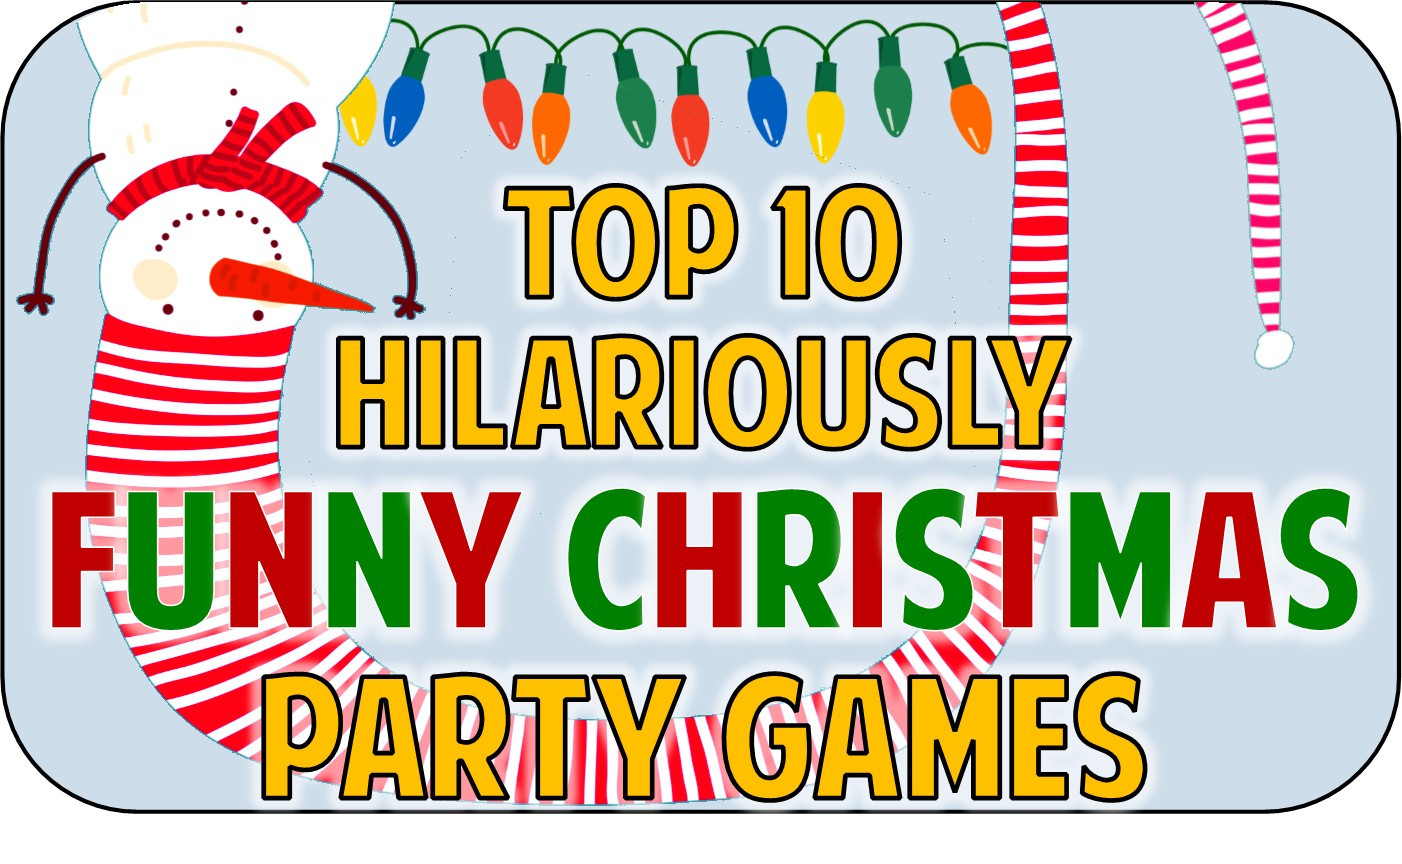 Work Christmas Party Ideas For Adults
 Christmas Party fice Games